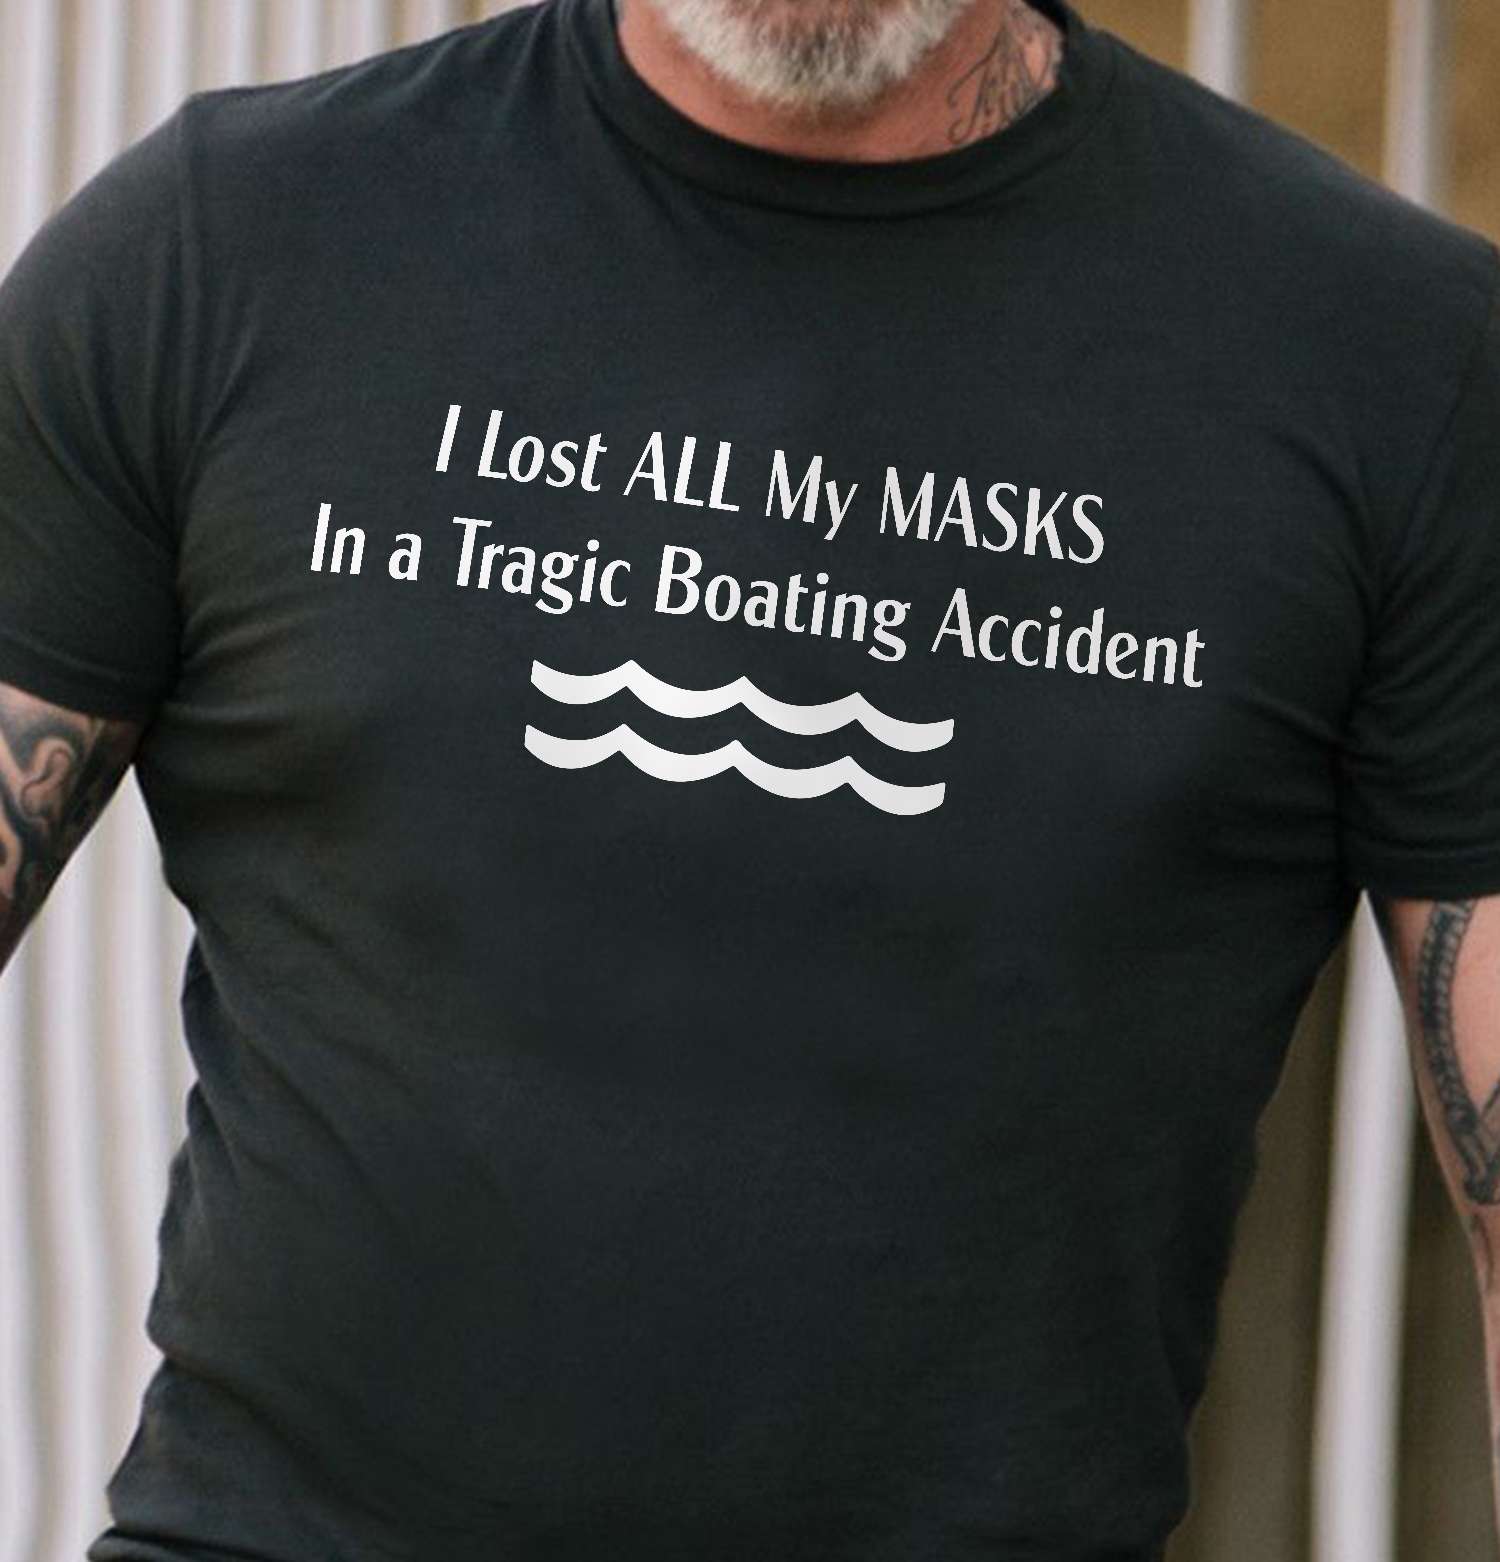 I lost all my masks in a tragic boating accident